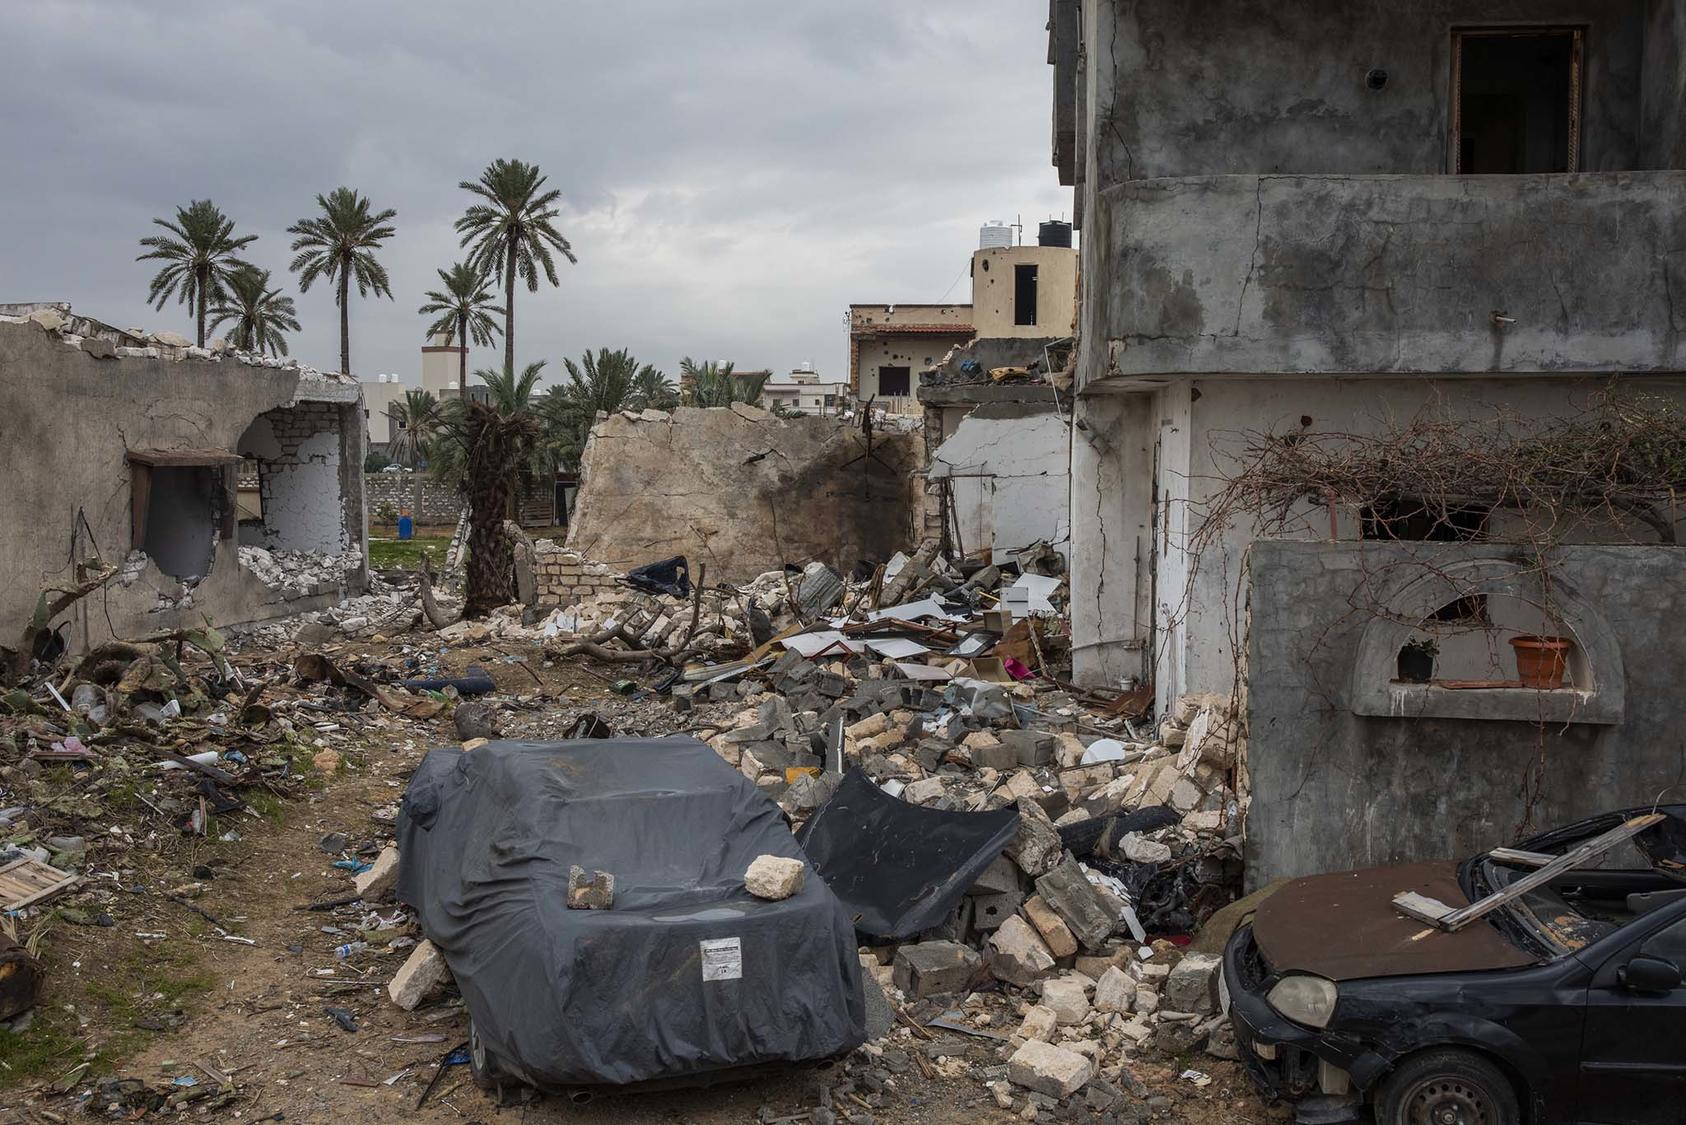 War-damaged buildings in Libya’s capital, Tripoli, in early 2020. A year later, a peace process faces dangers rooted largely in divisions among Libya’s three main regions as Libyans seek to elect a government in 2021. (Ivor Prickett/The New York Times)